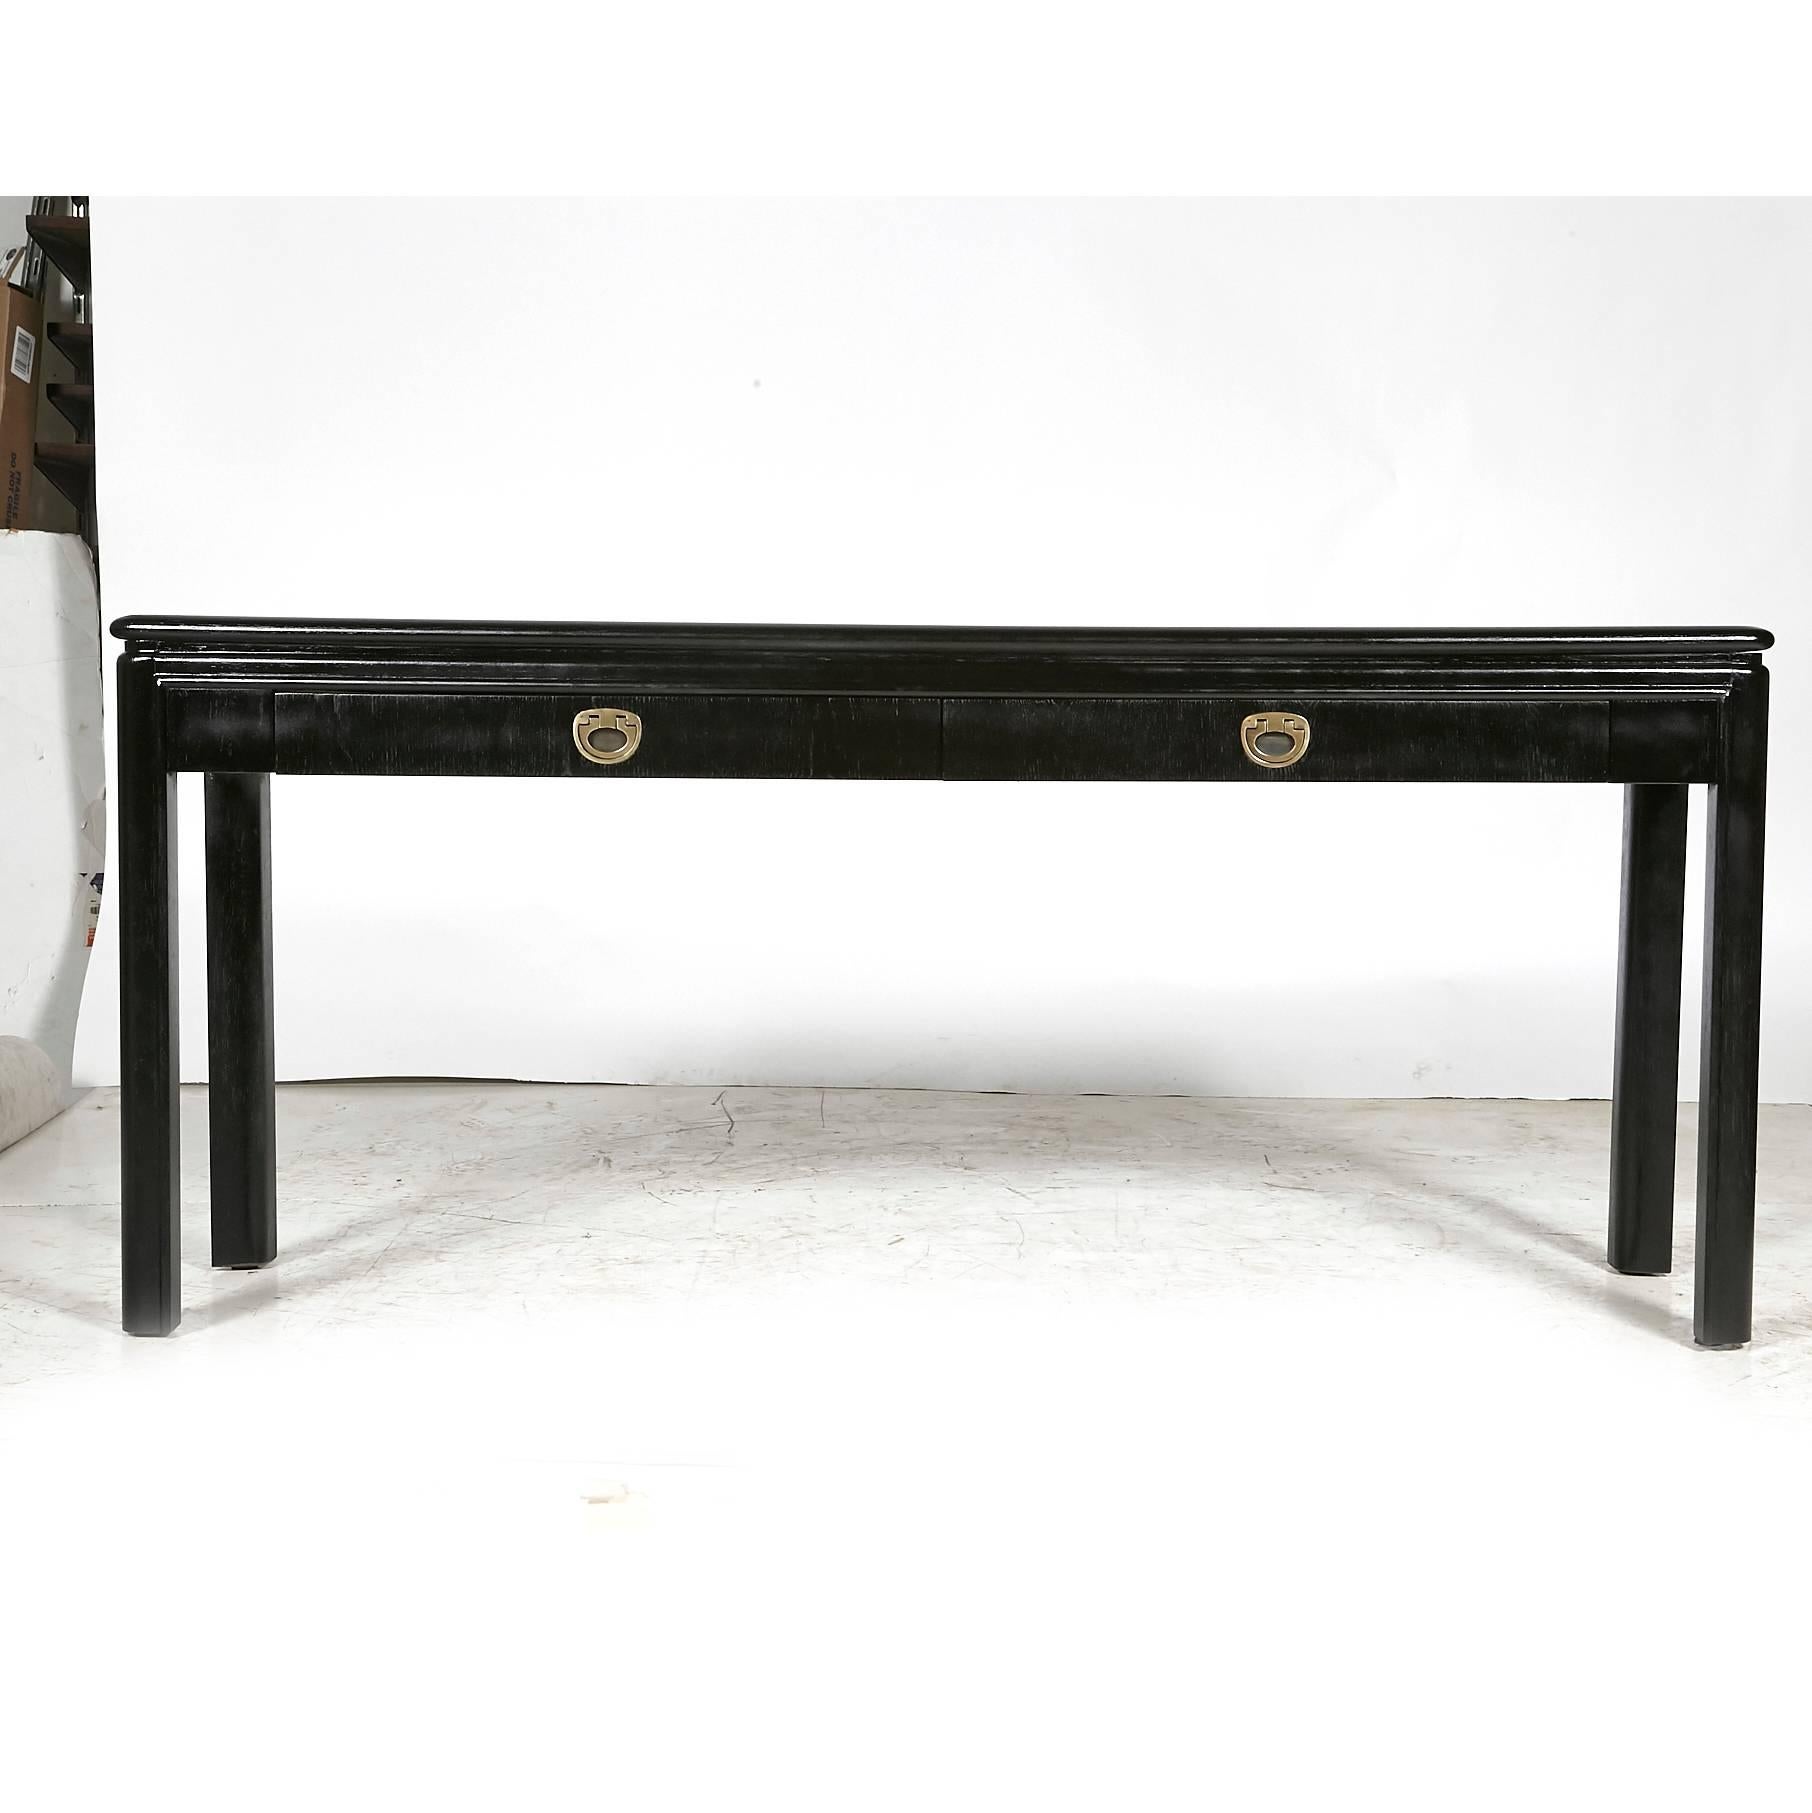 Drexel Furniture Co Passage ebonized hallway console table with two drawers. The table is newly rehabilitated. Marked.